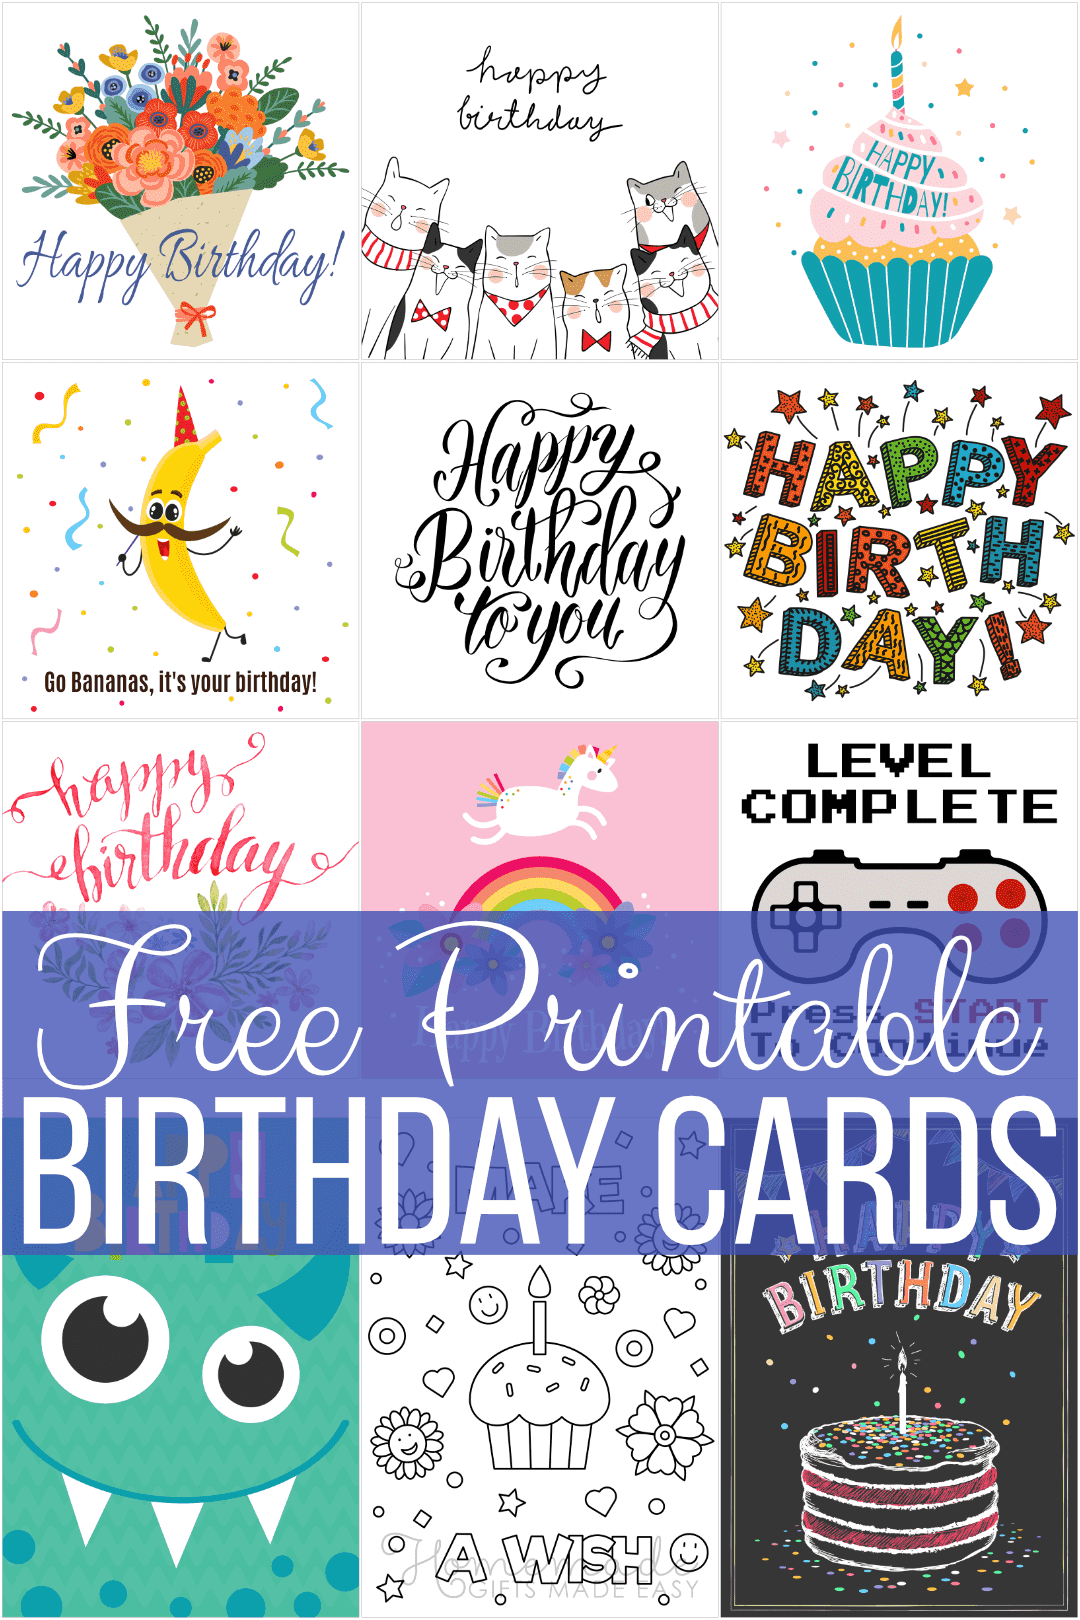 Free Printable Birthday Cards For Everyone - Free Printable Birthday Party Invitations With Photo